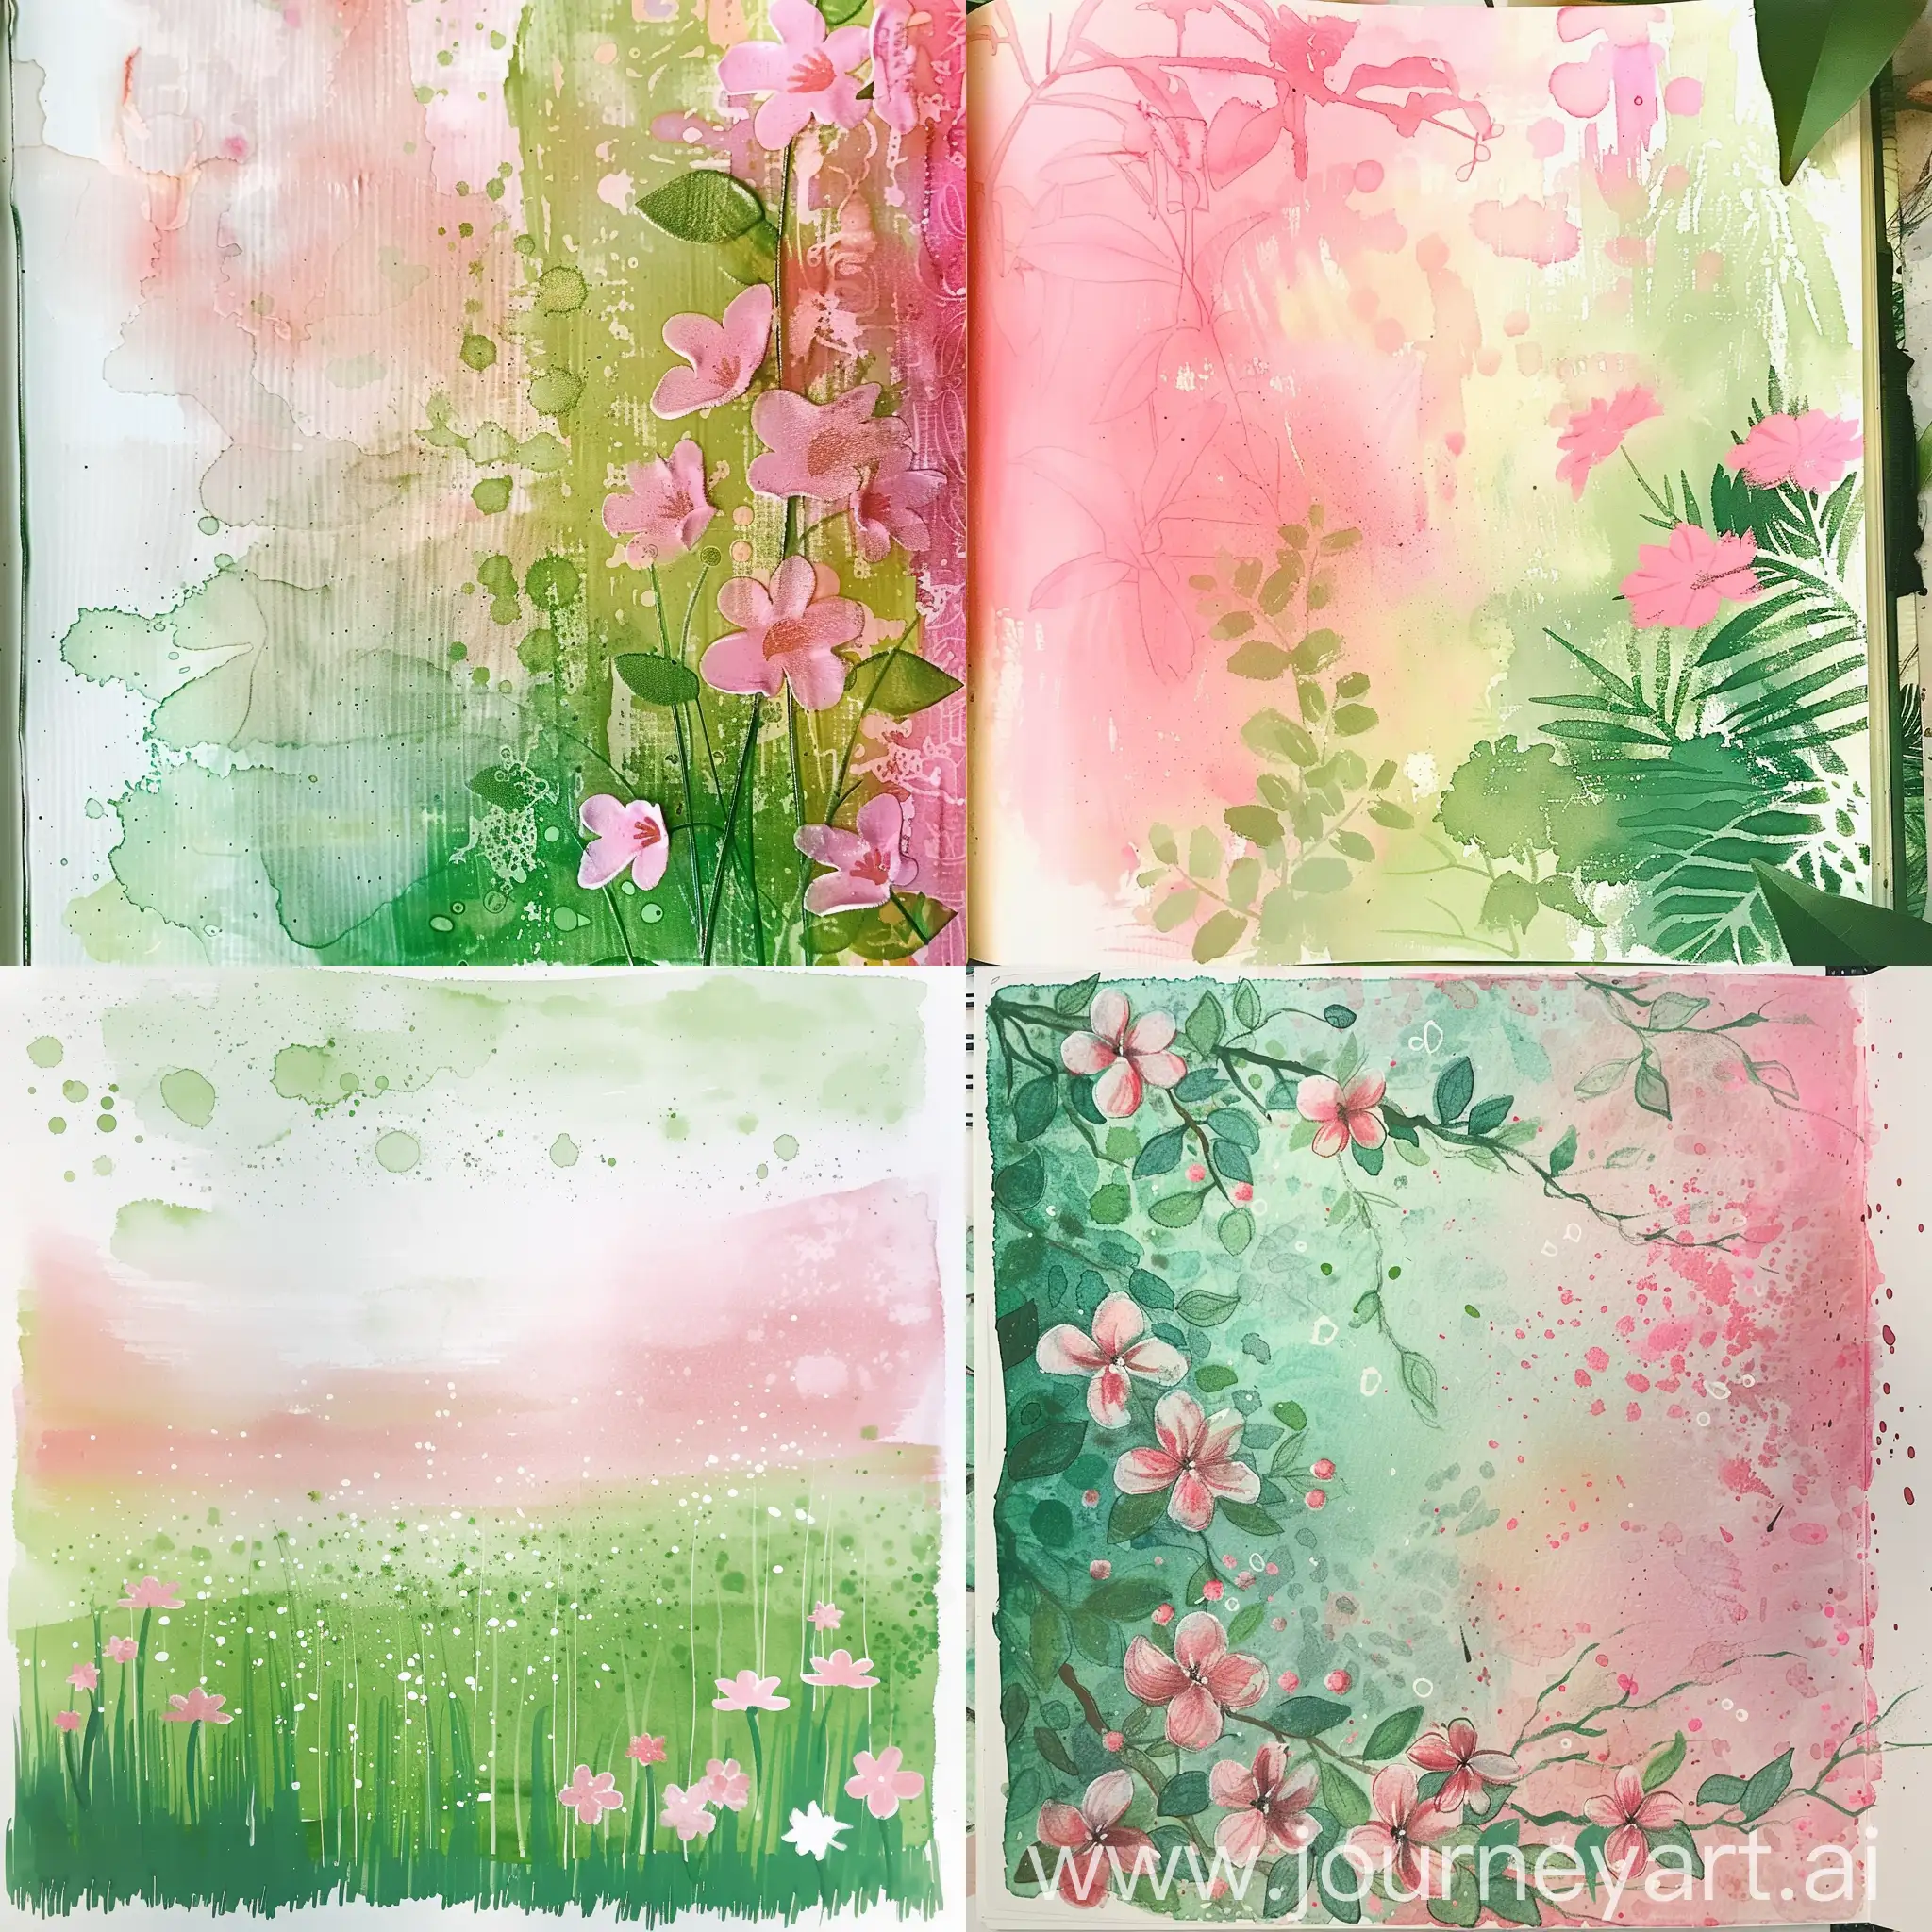 Abstract-Gradient-Painting-in-Spring-Green-and-Pink-Colors